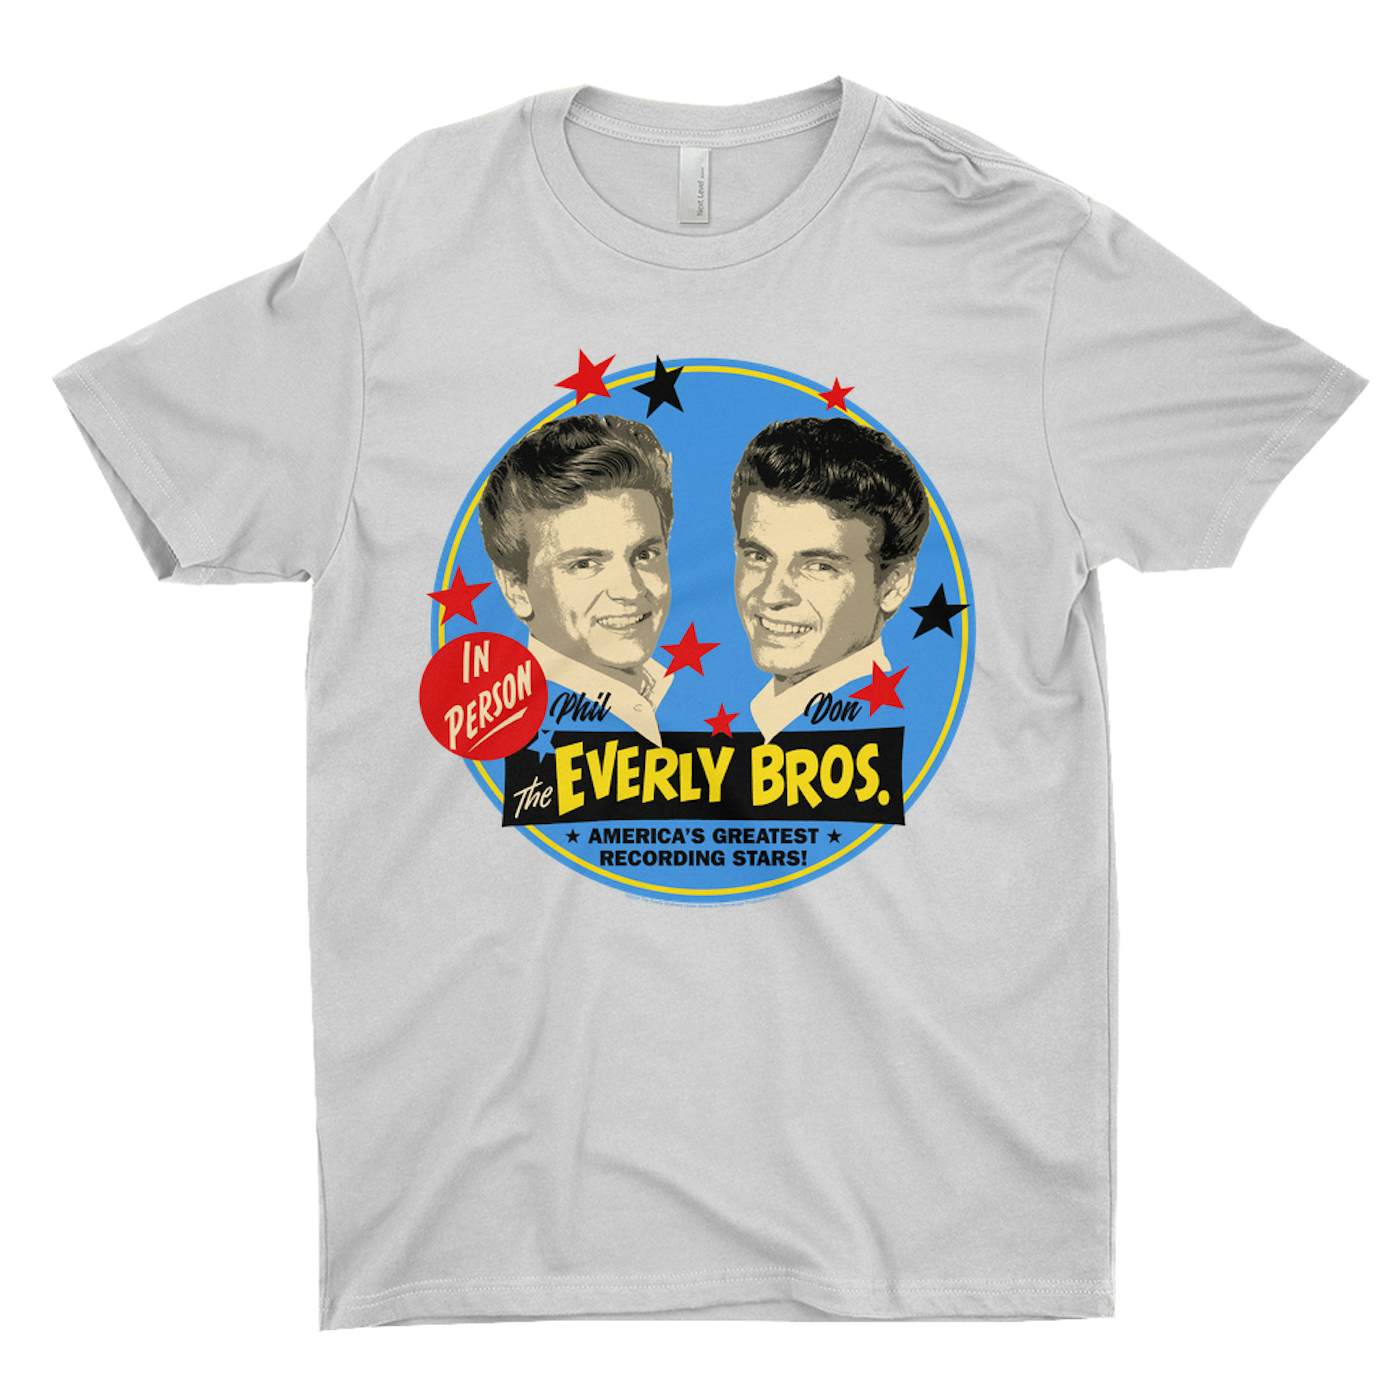 The Everly Brothers T-Shirt | America's Greatest Recording Stars Promotion Image The Everly Brothers Shirt